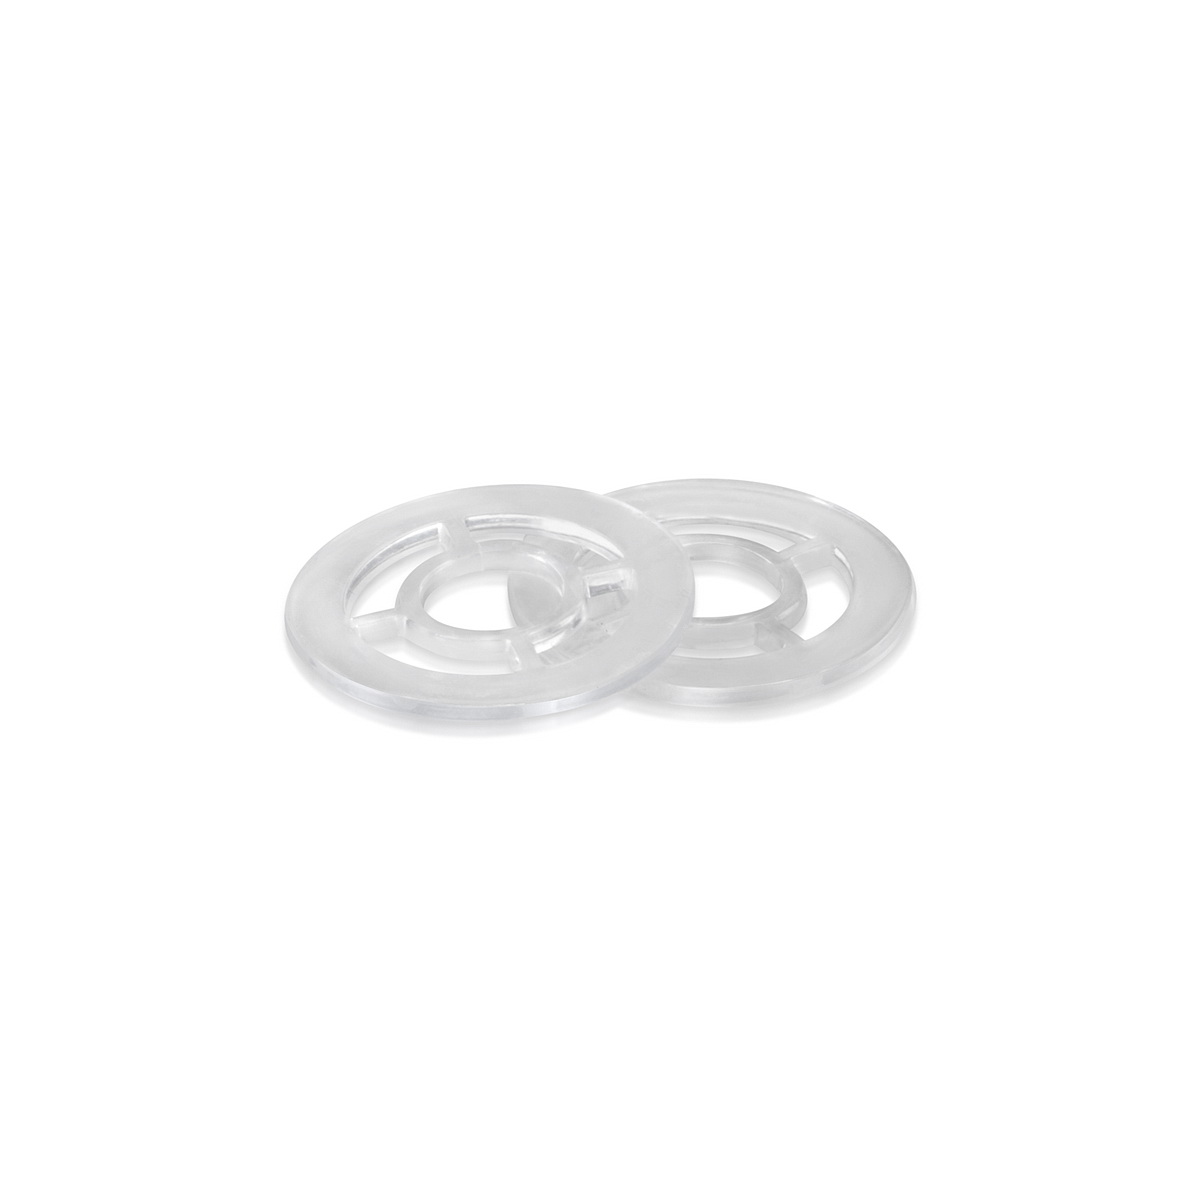 Silicone Washer, 1-1/4'' OD x 5/16'' ID x 0.05'' Thick. (For M8 or 5/16'' Stud)